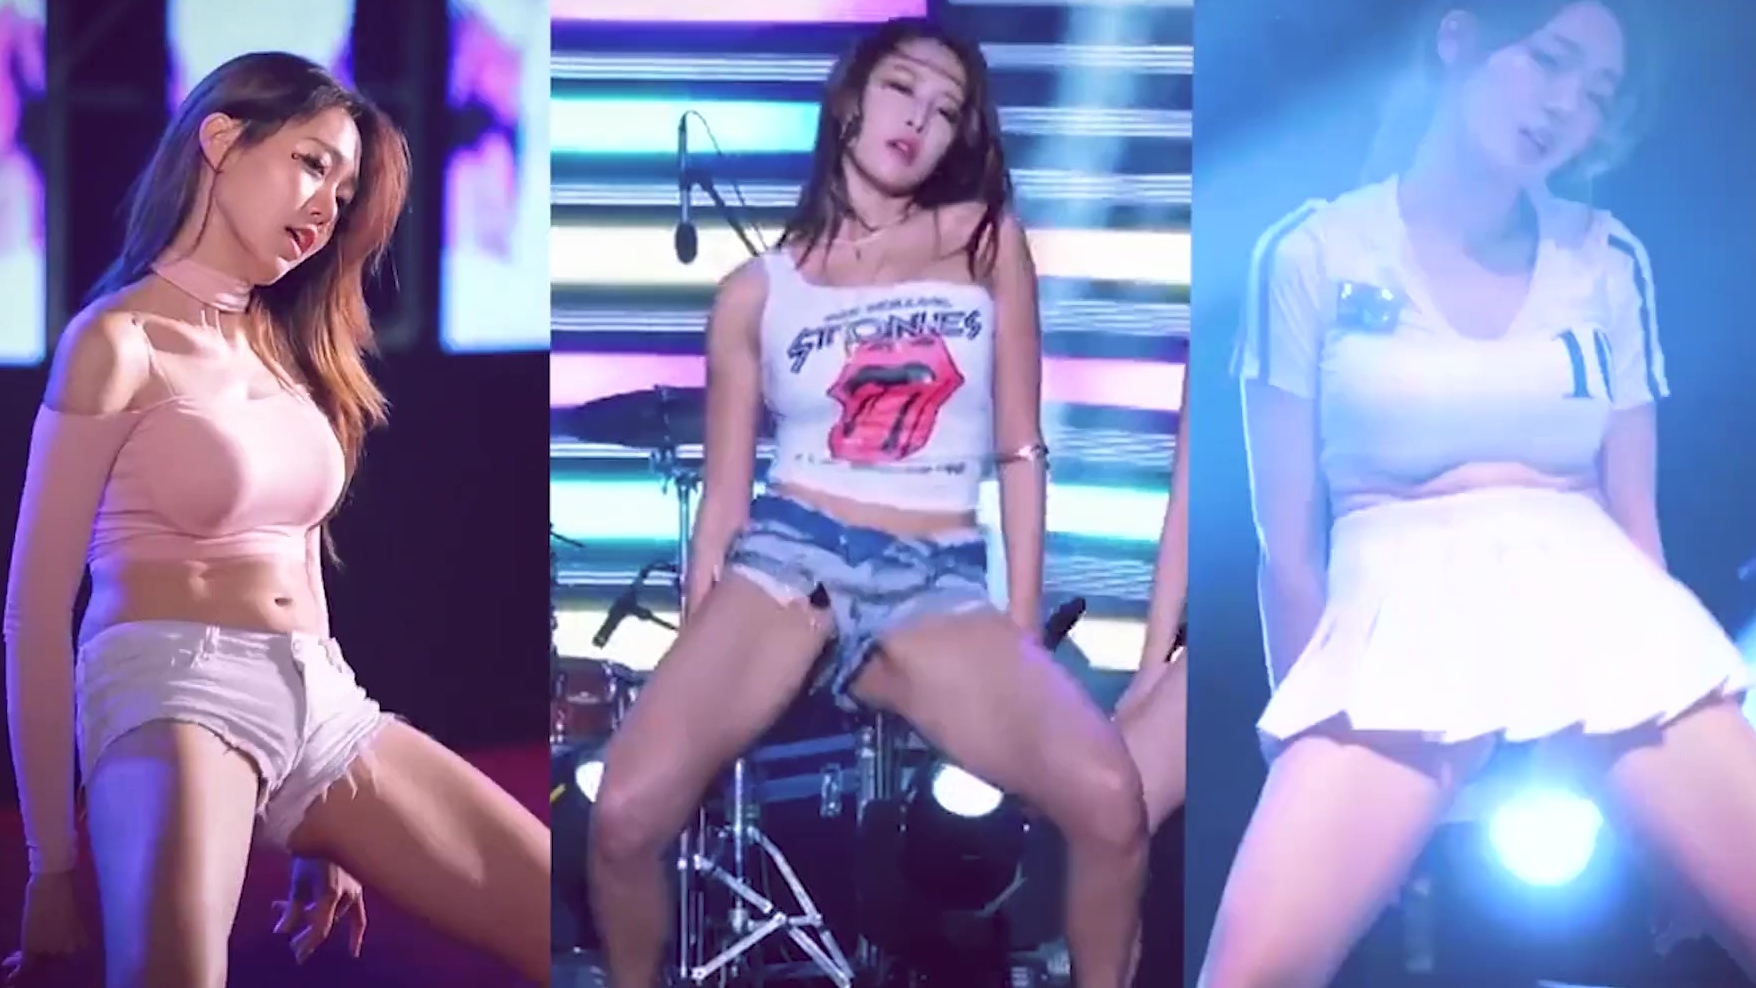 Korean Dance Group Sex - Dancing Girls teasing with Fit Bodies in Mixed K-Pop PMV Compilation